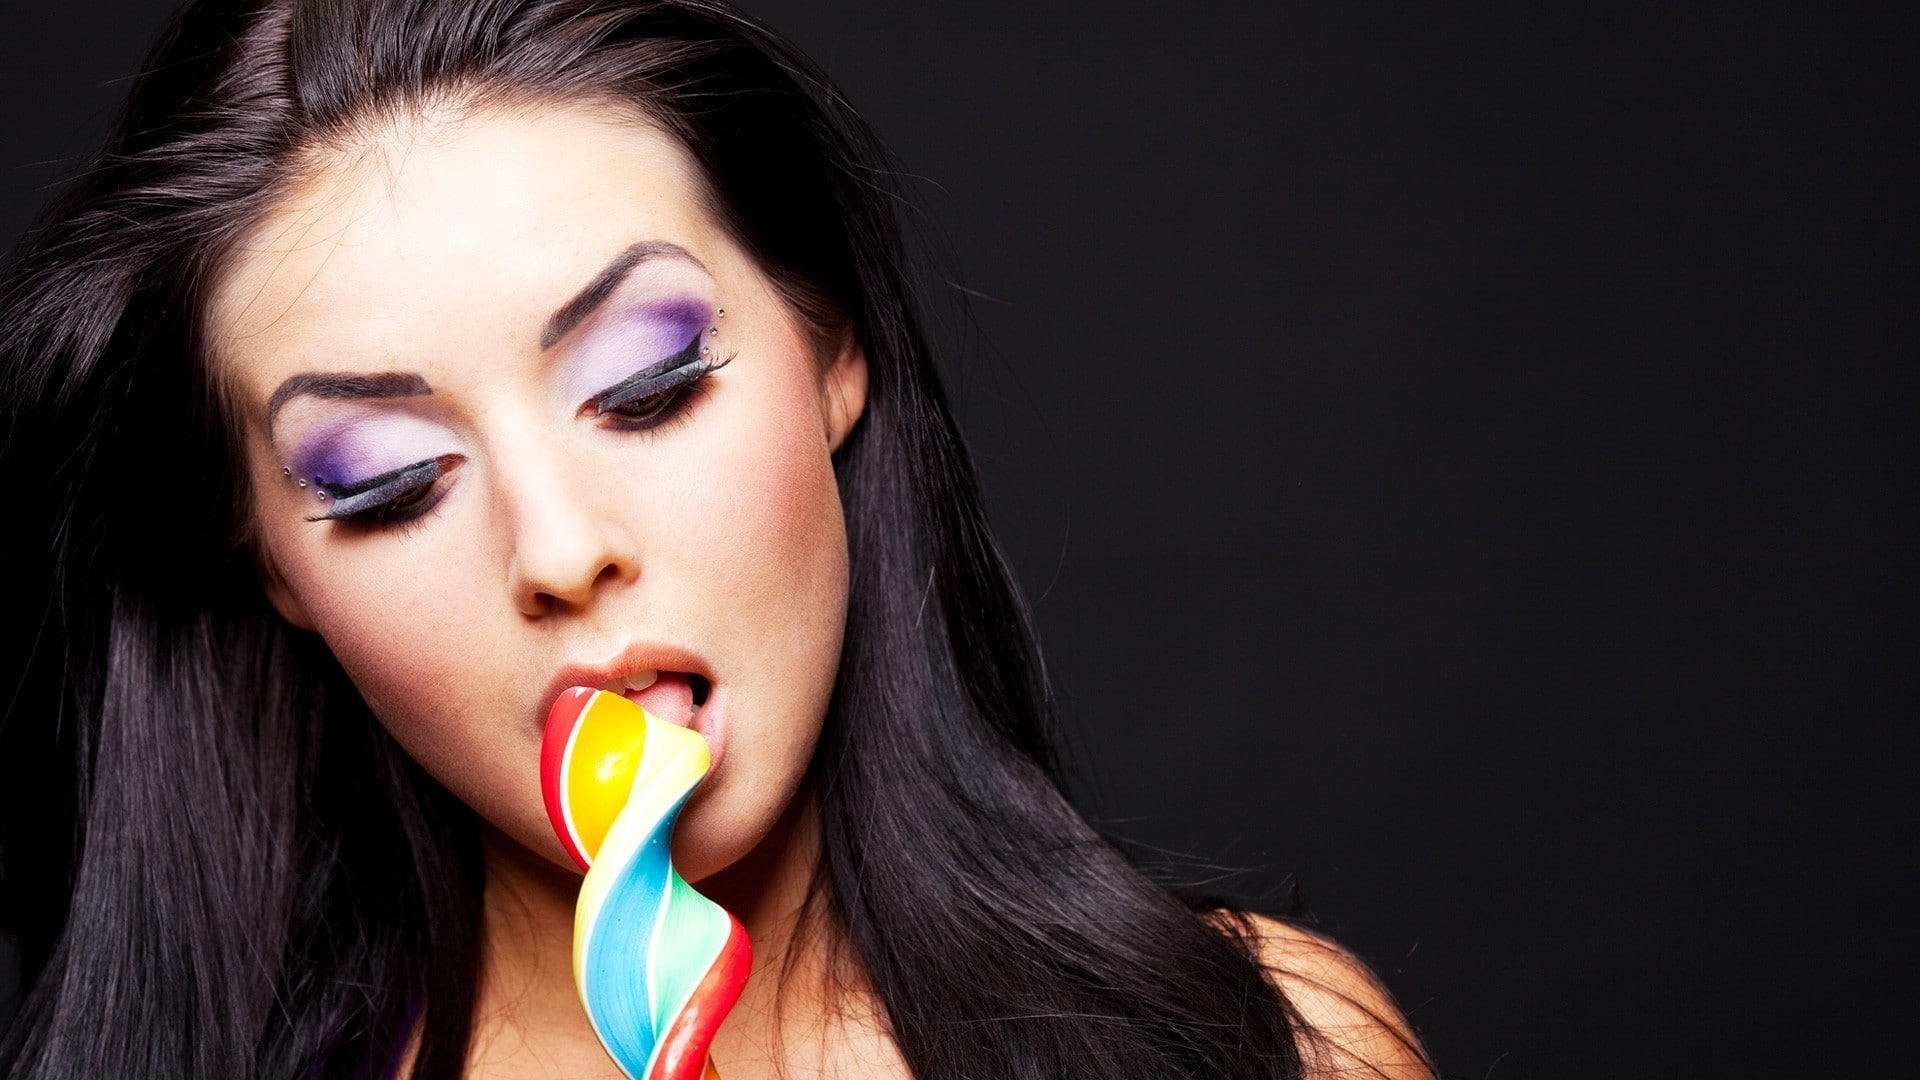 black hair, licking, innuendo, makeup, face, women, model, simple background